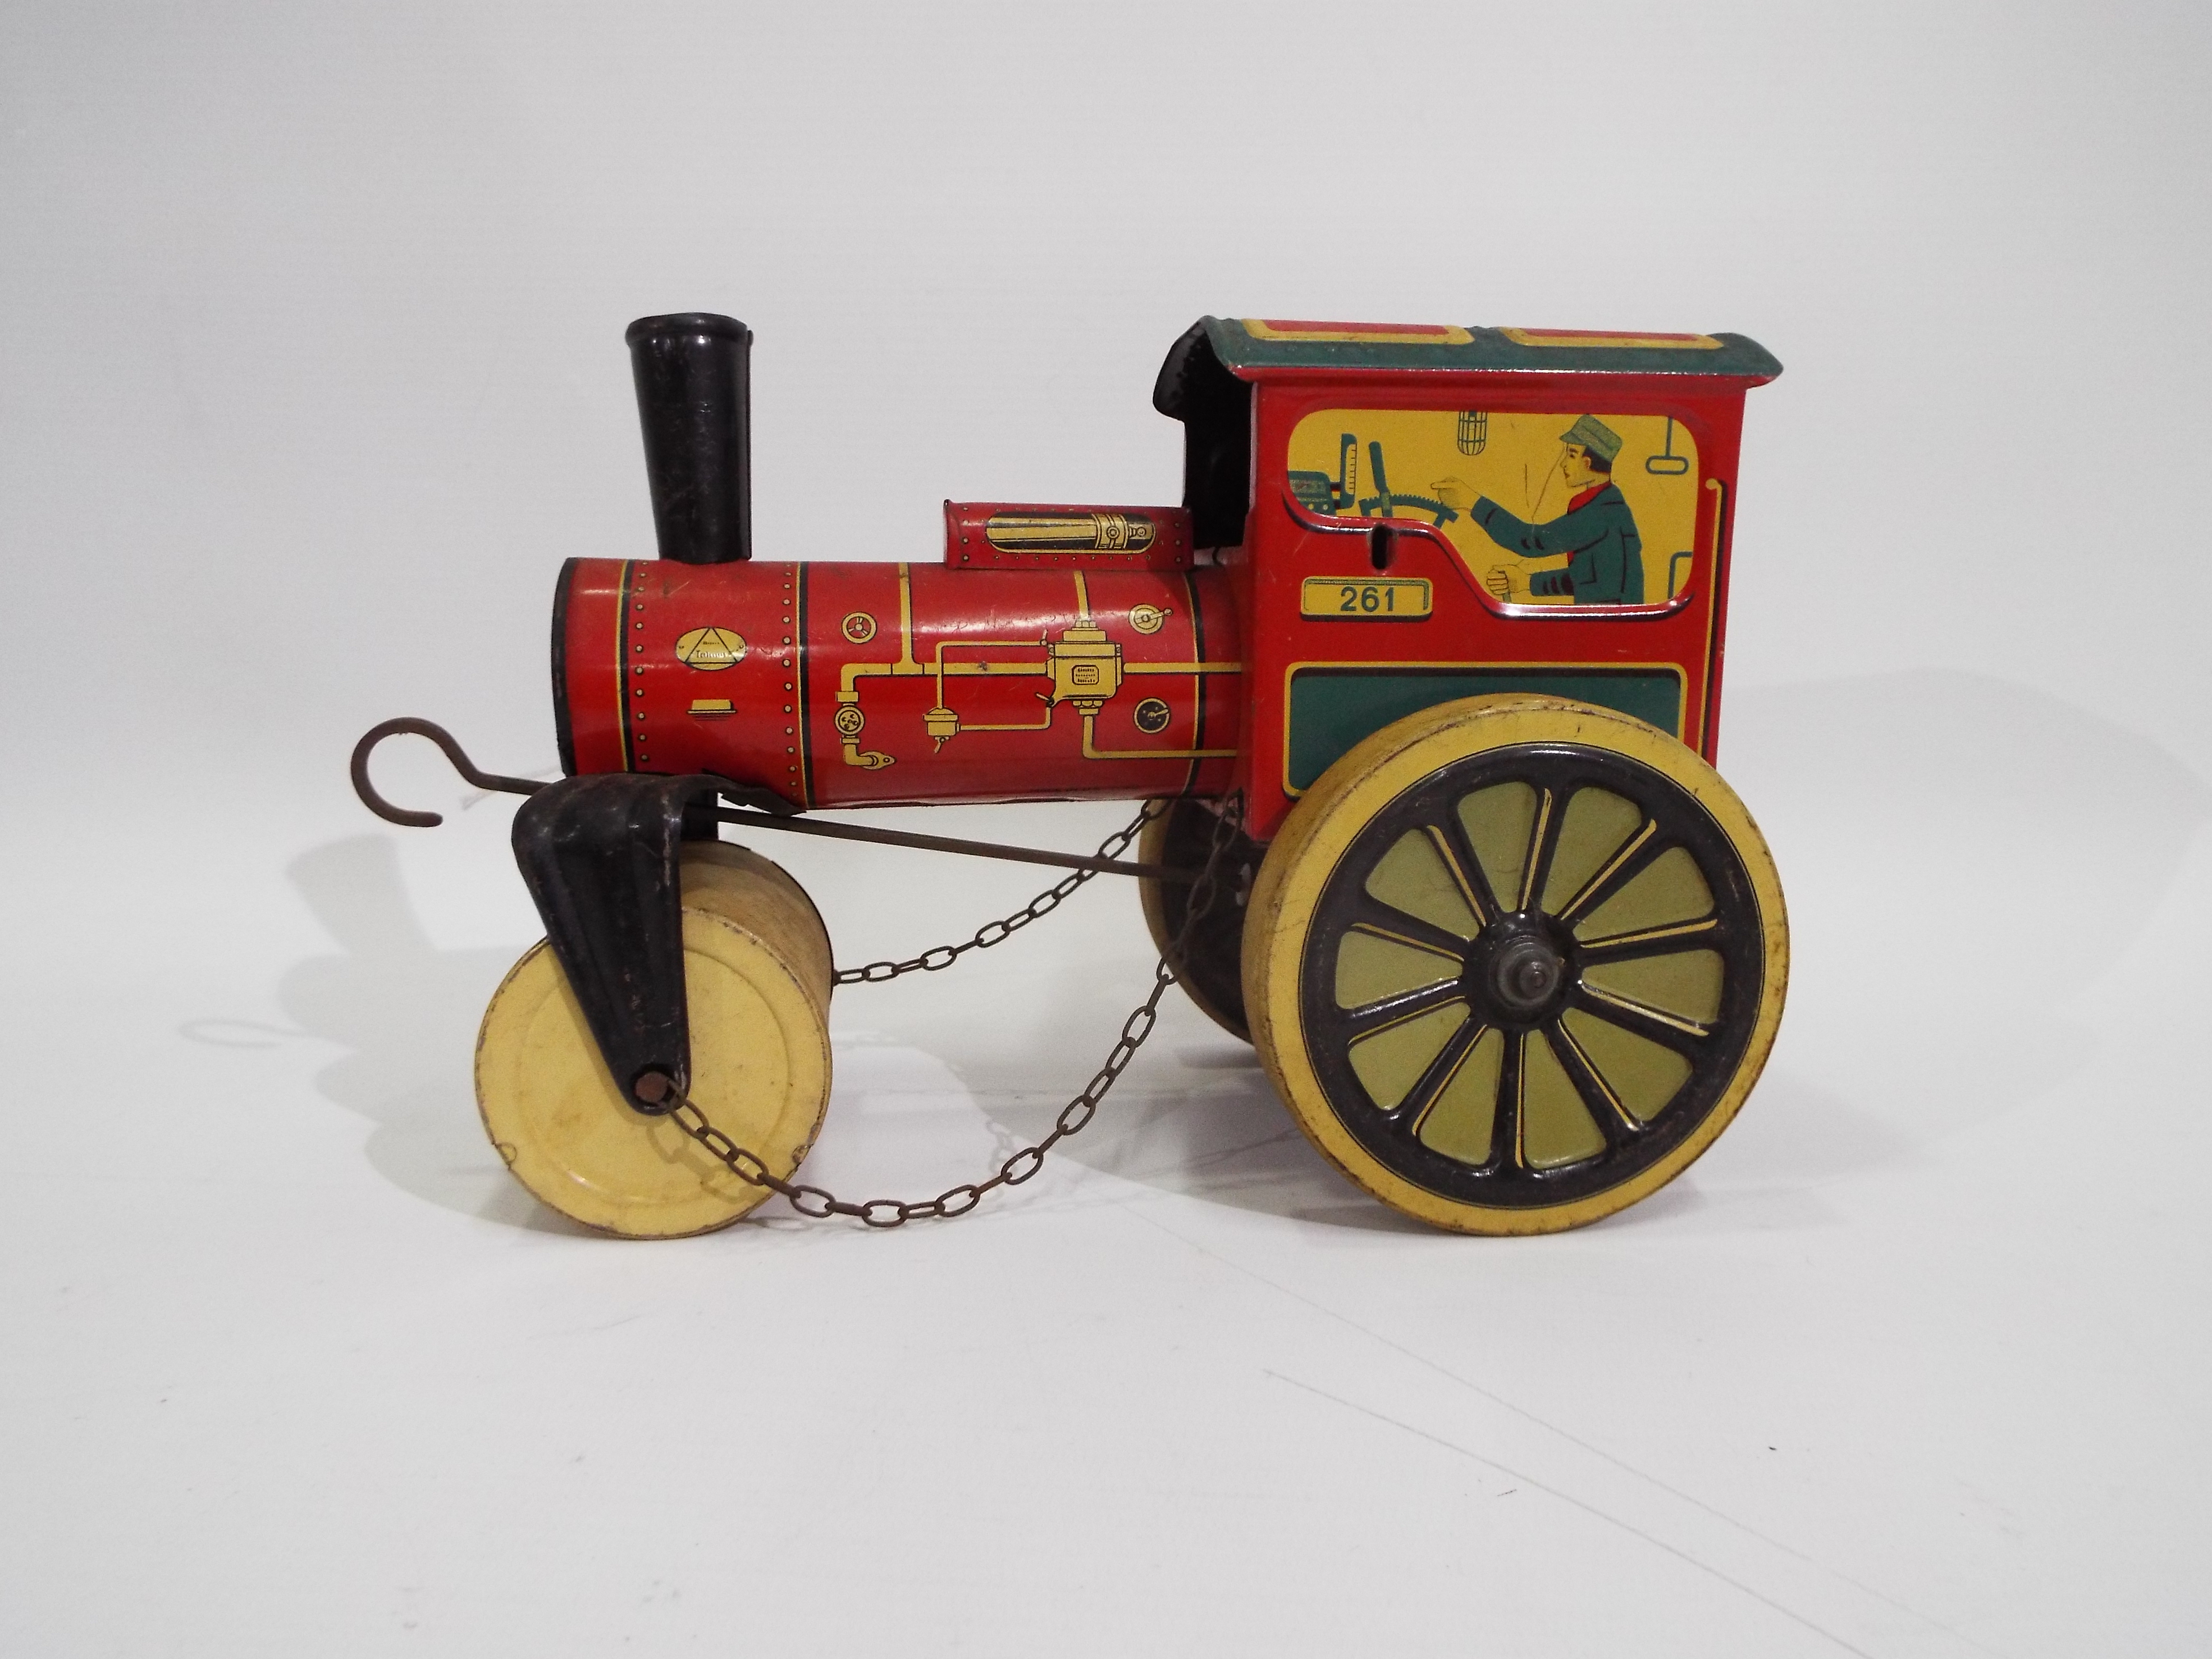 DGM - A vintage clockwork tinplate Steam Roller marked D.G.M. D.P. made in U.S.-Zone Germany.